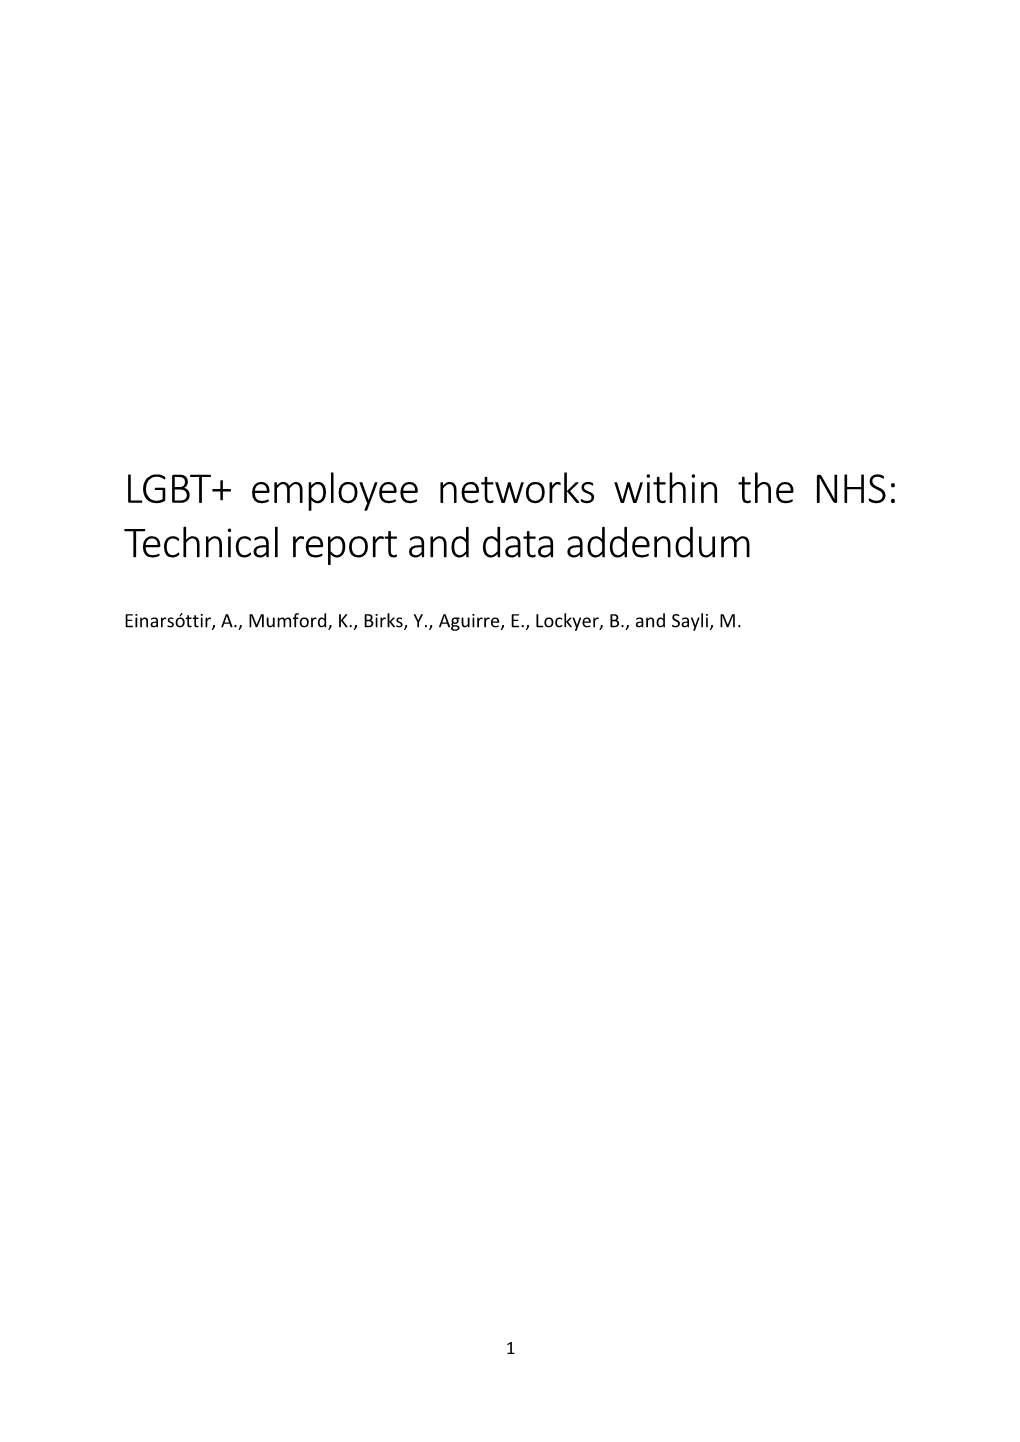 LGBT+ Employee Networks Within the NHS: Technical Report and Data Addendum